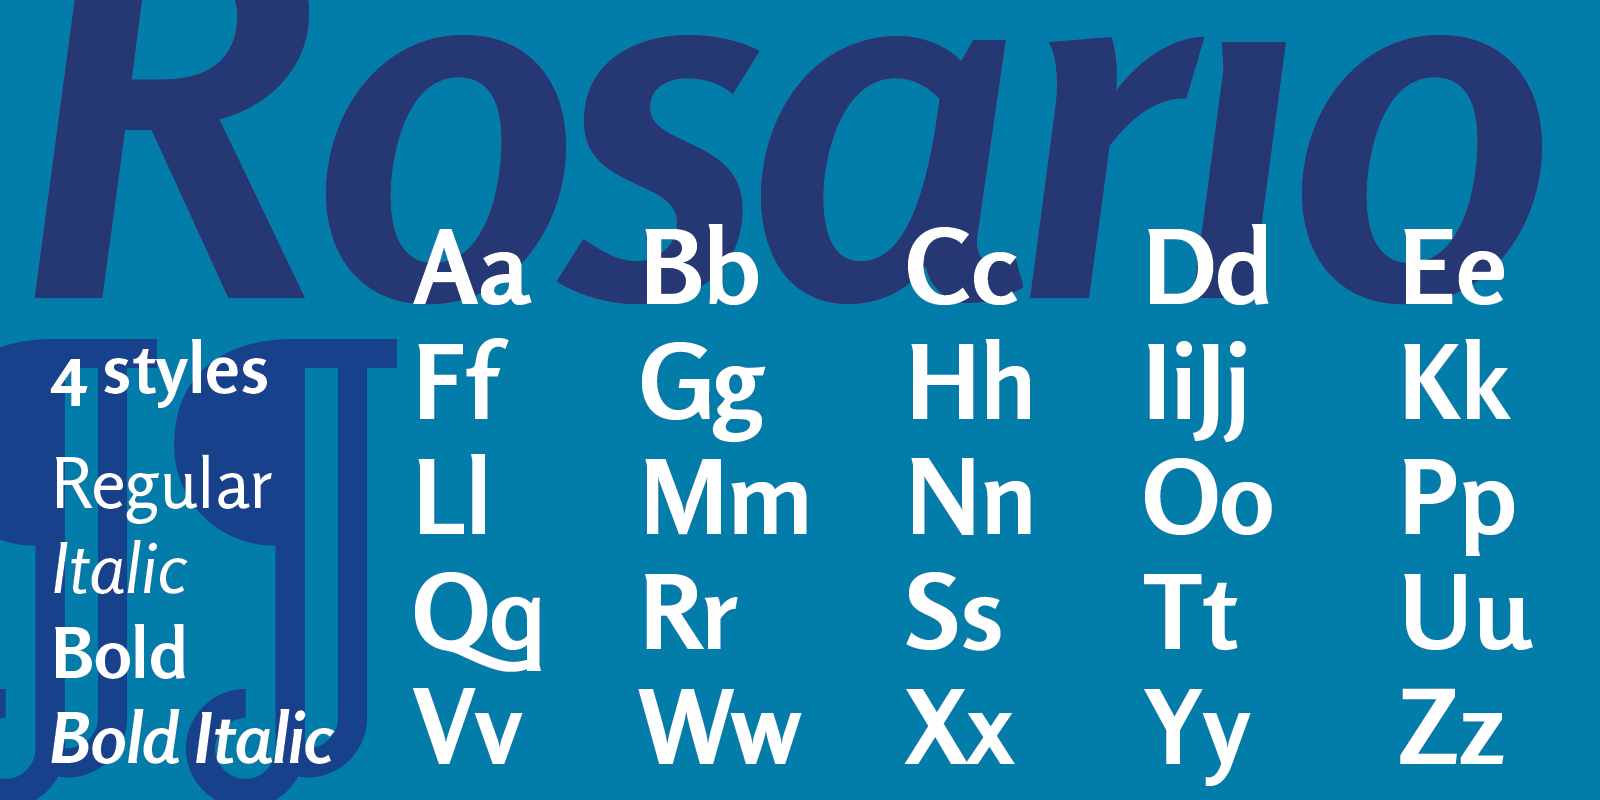 Card displaying Roboto typeface in various styles